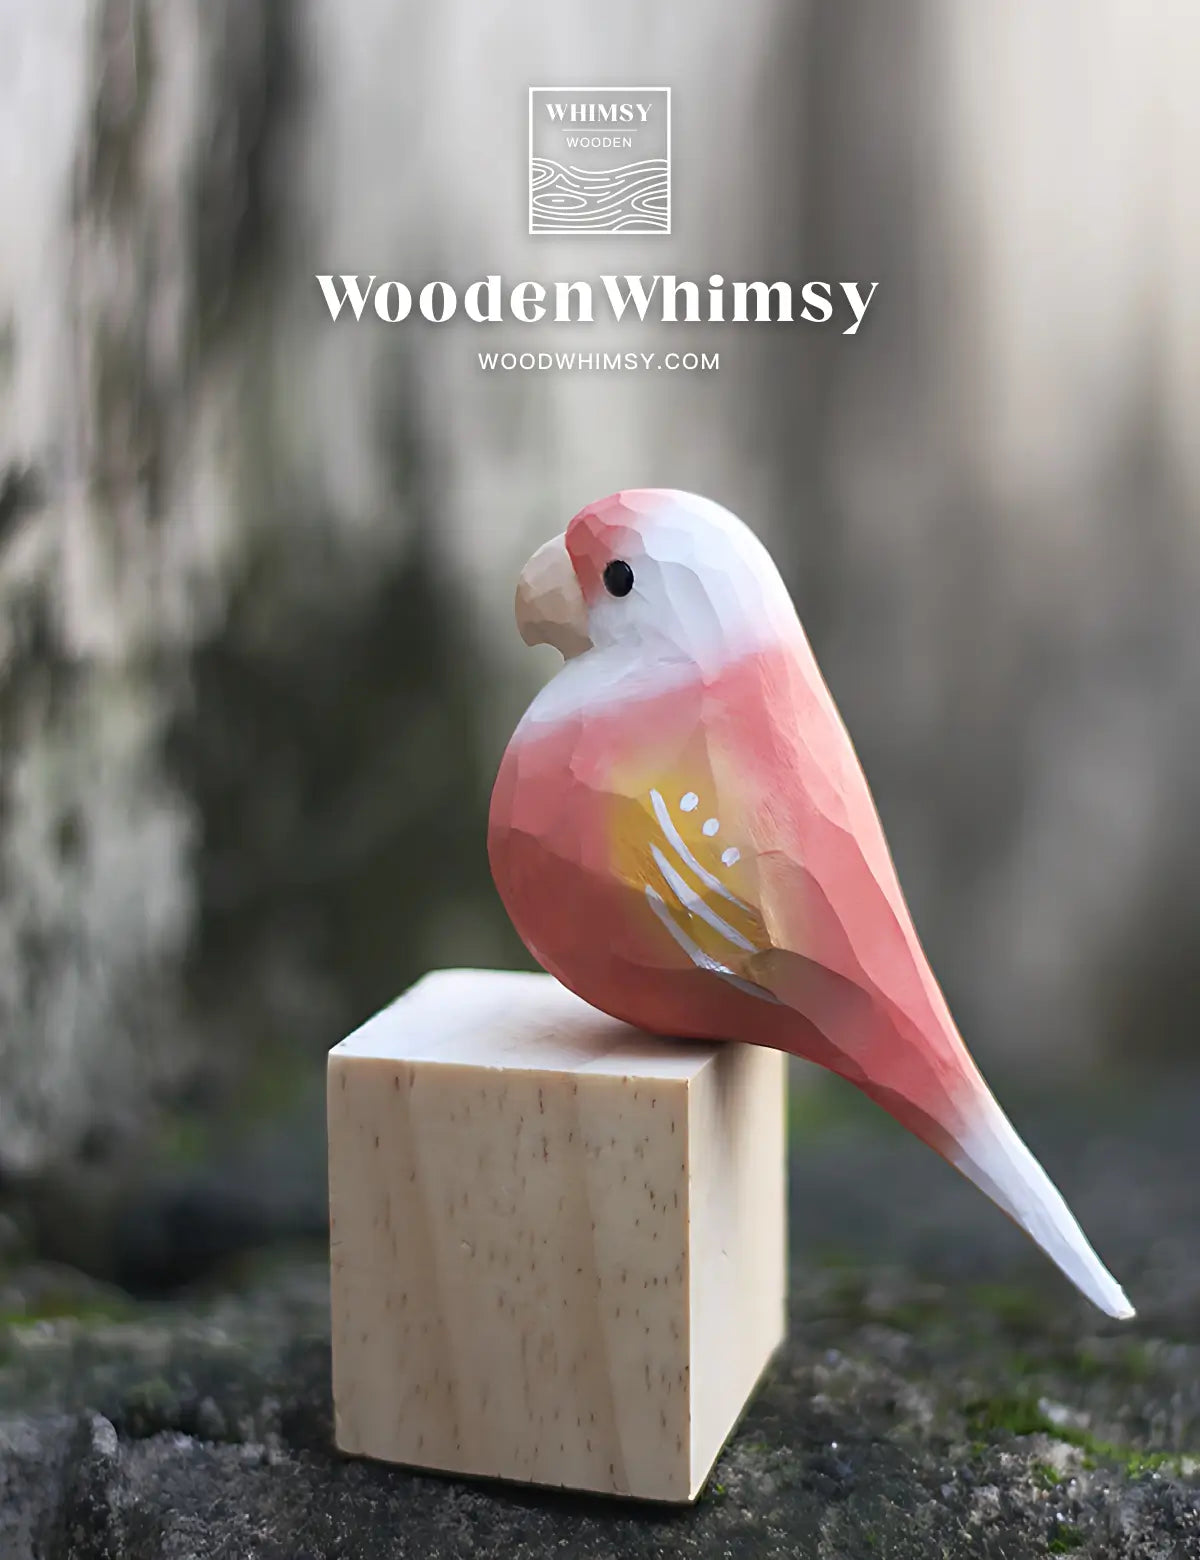 alt="Handcrafted Pink Parakeet Wooden Bird by WoodenWhimsy - Exquisite Home Ornament" - 03